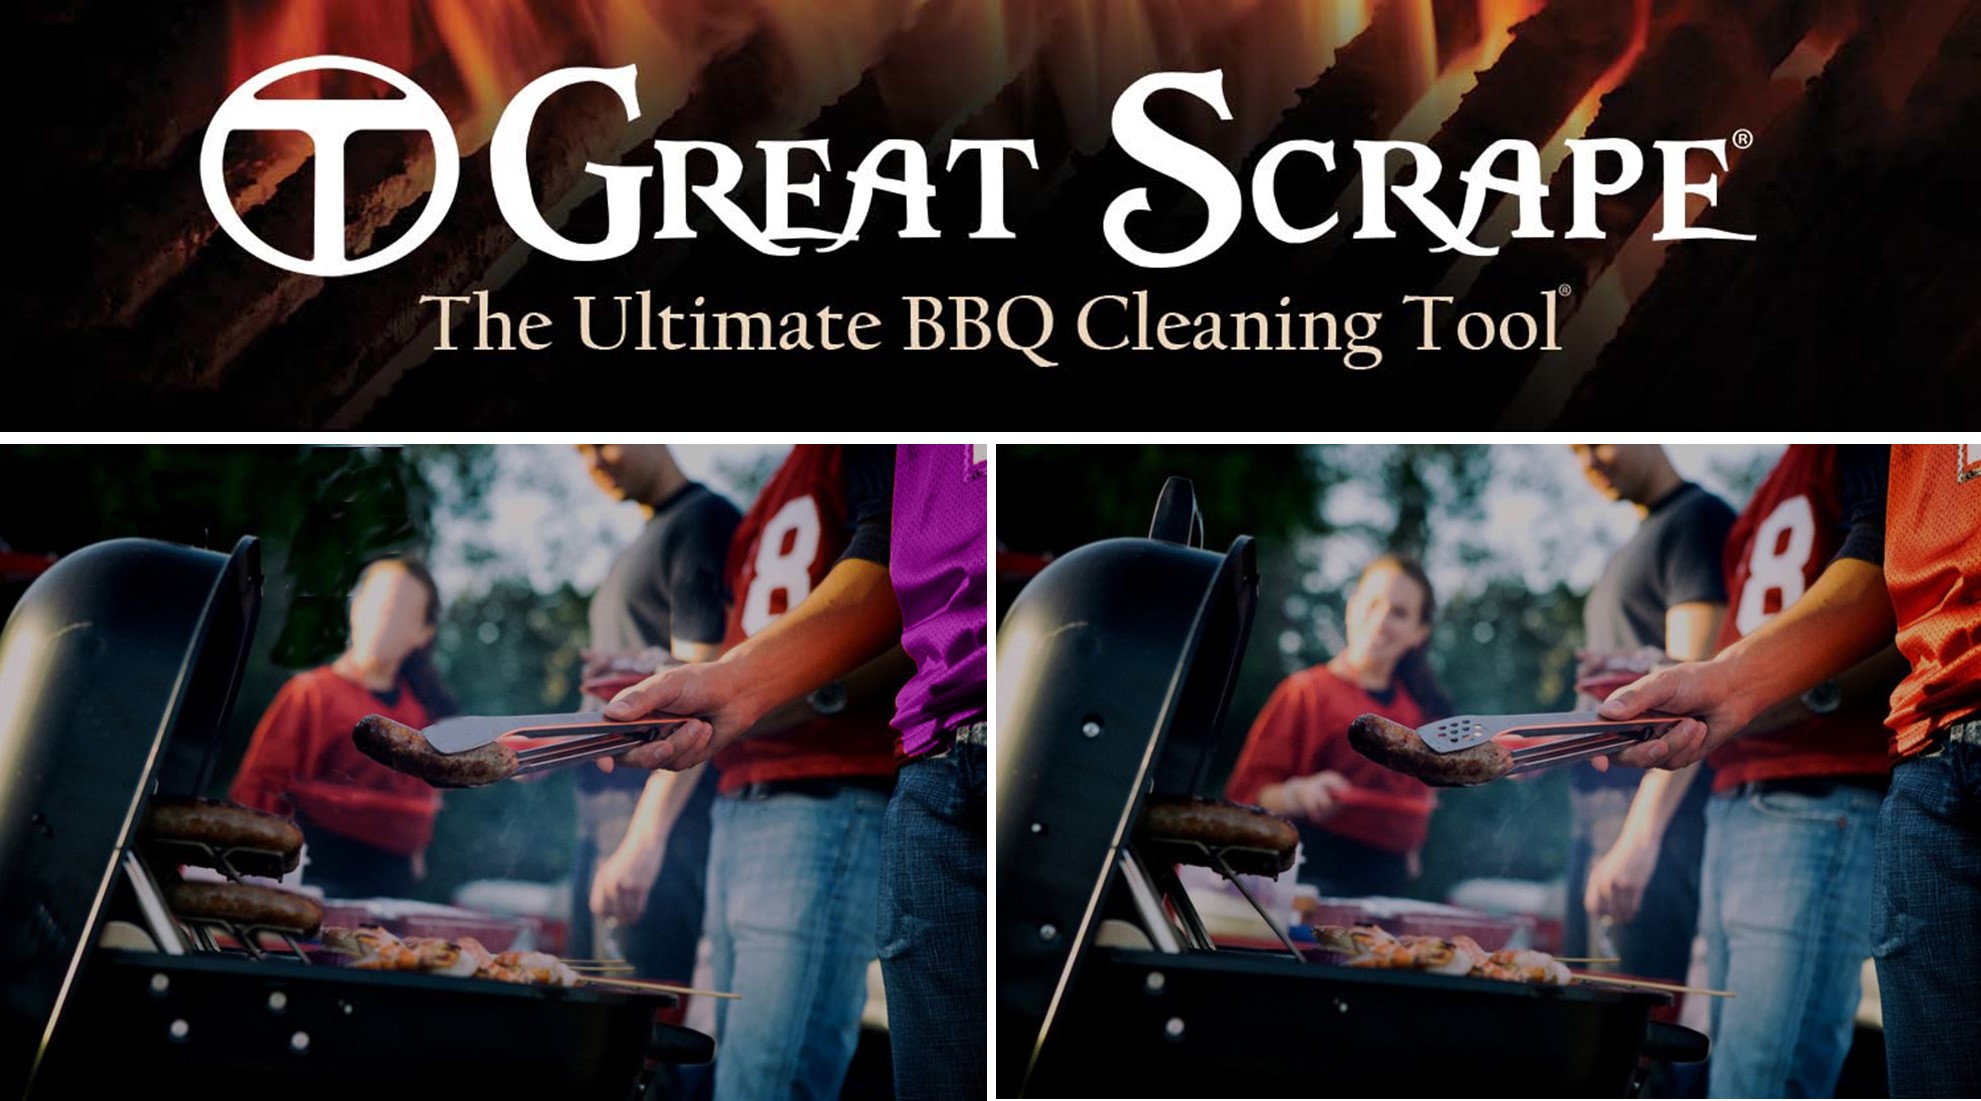 Great Scrape Woody Pro Grill Cleaner